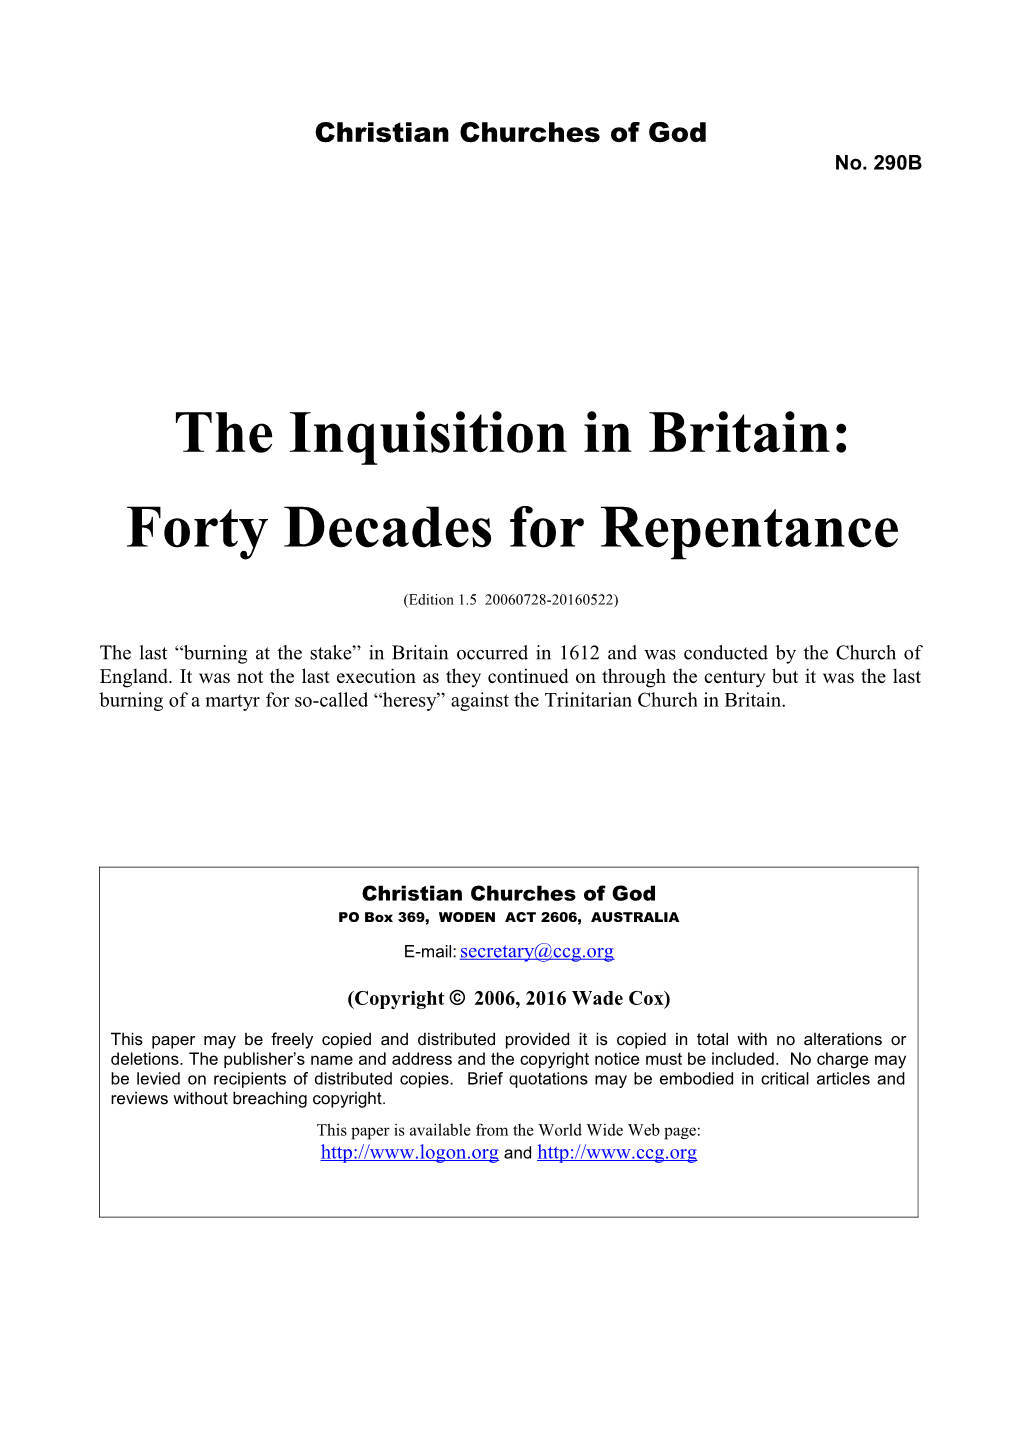 The Inquisition in Britain: Forty Decades for Repentance (No. 290B)